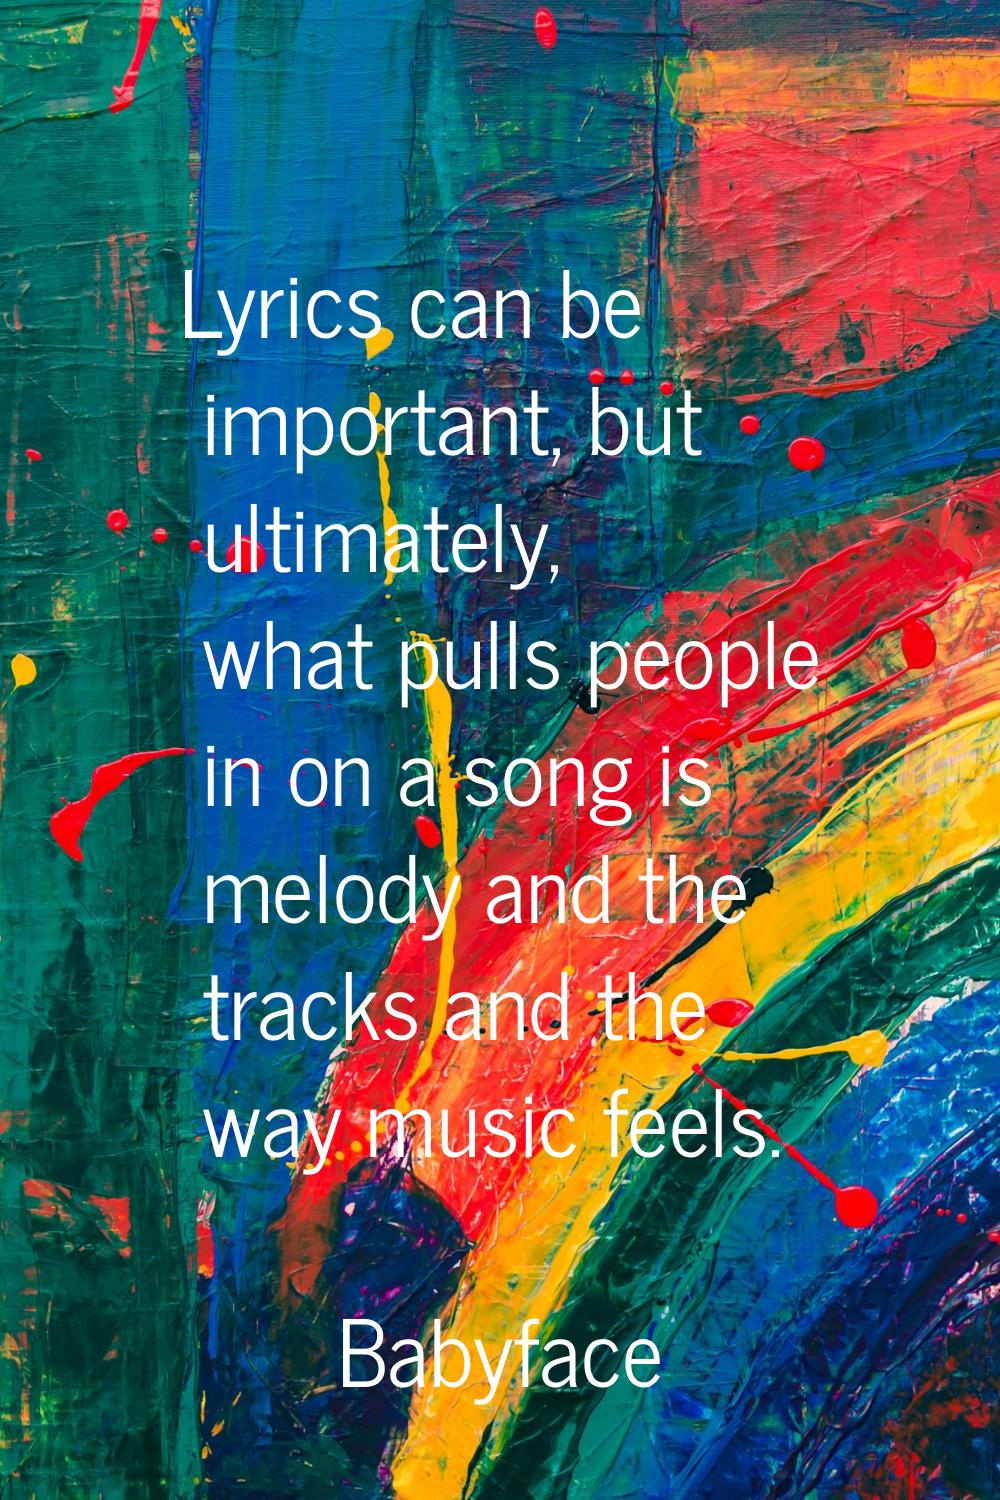 Lyrics can be important, but ultimately, what pulls people in on a song is melody and the tracks an